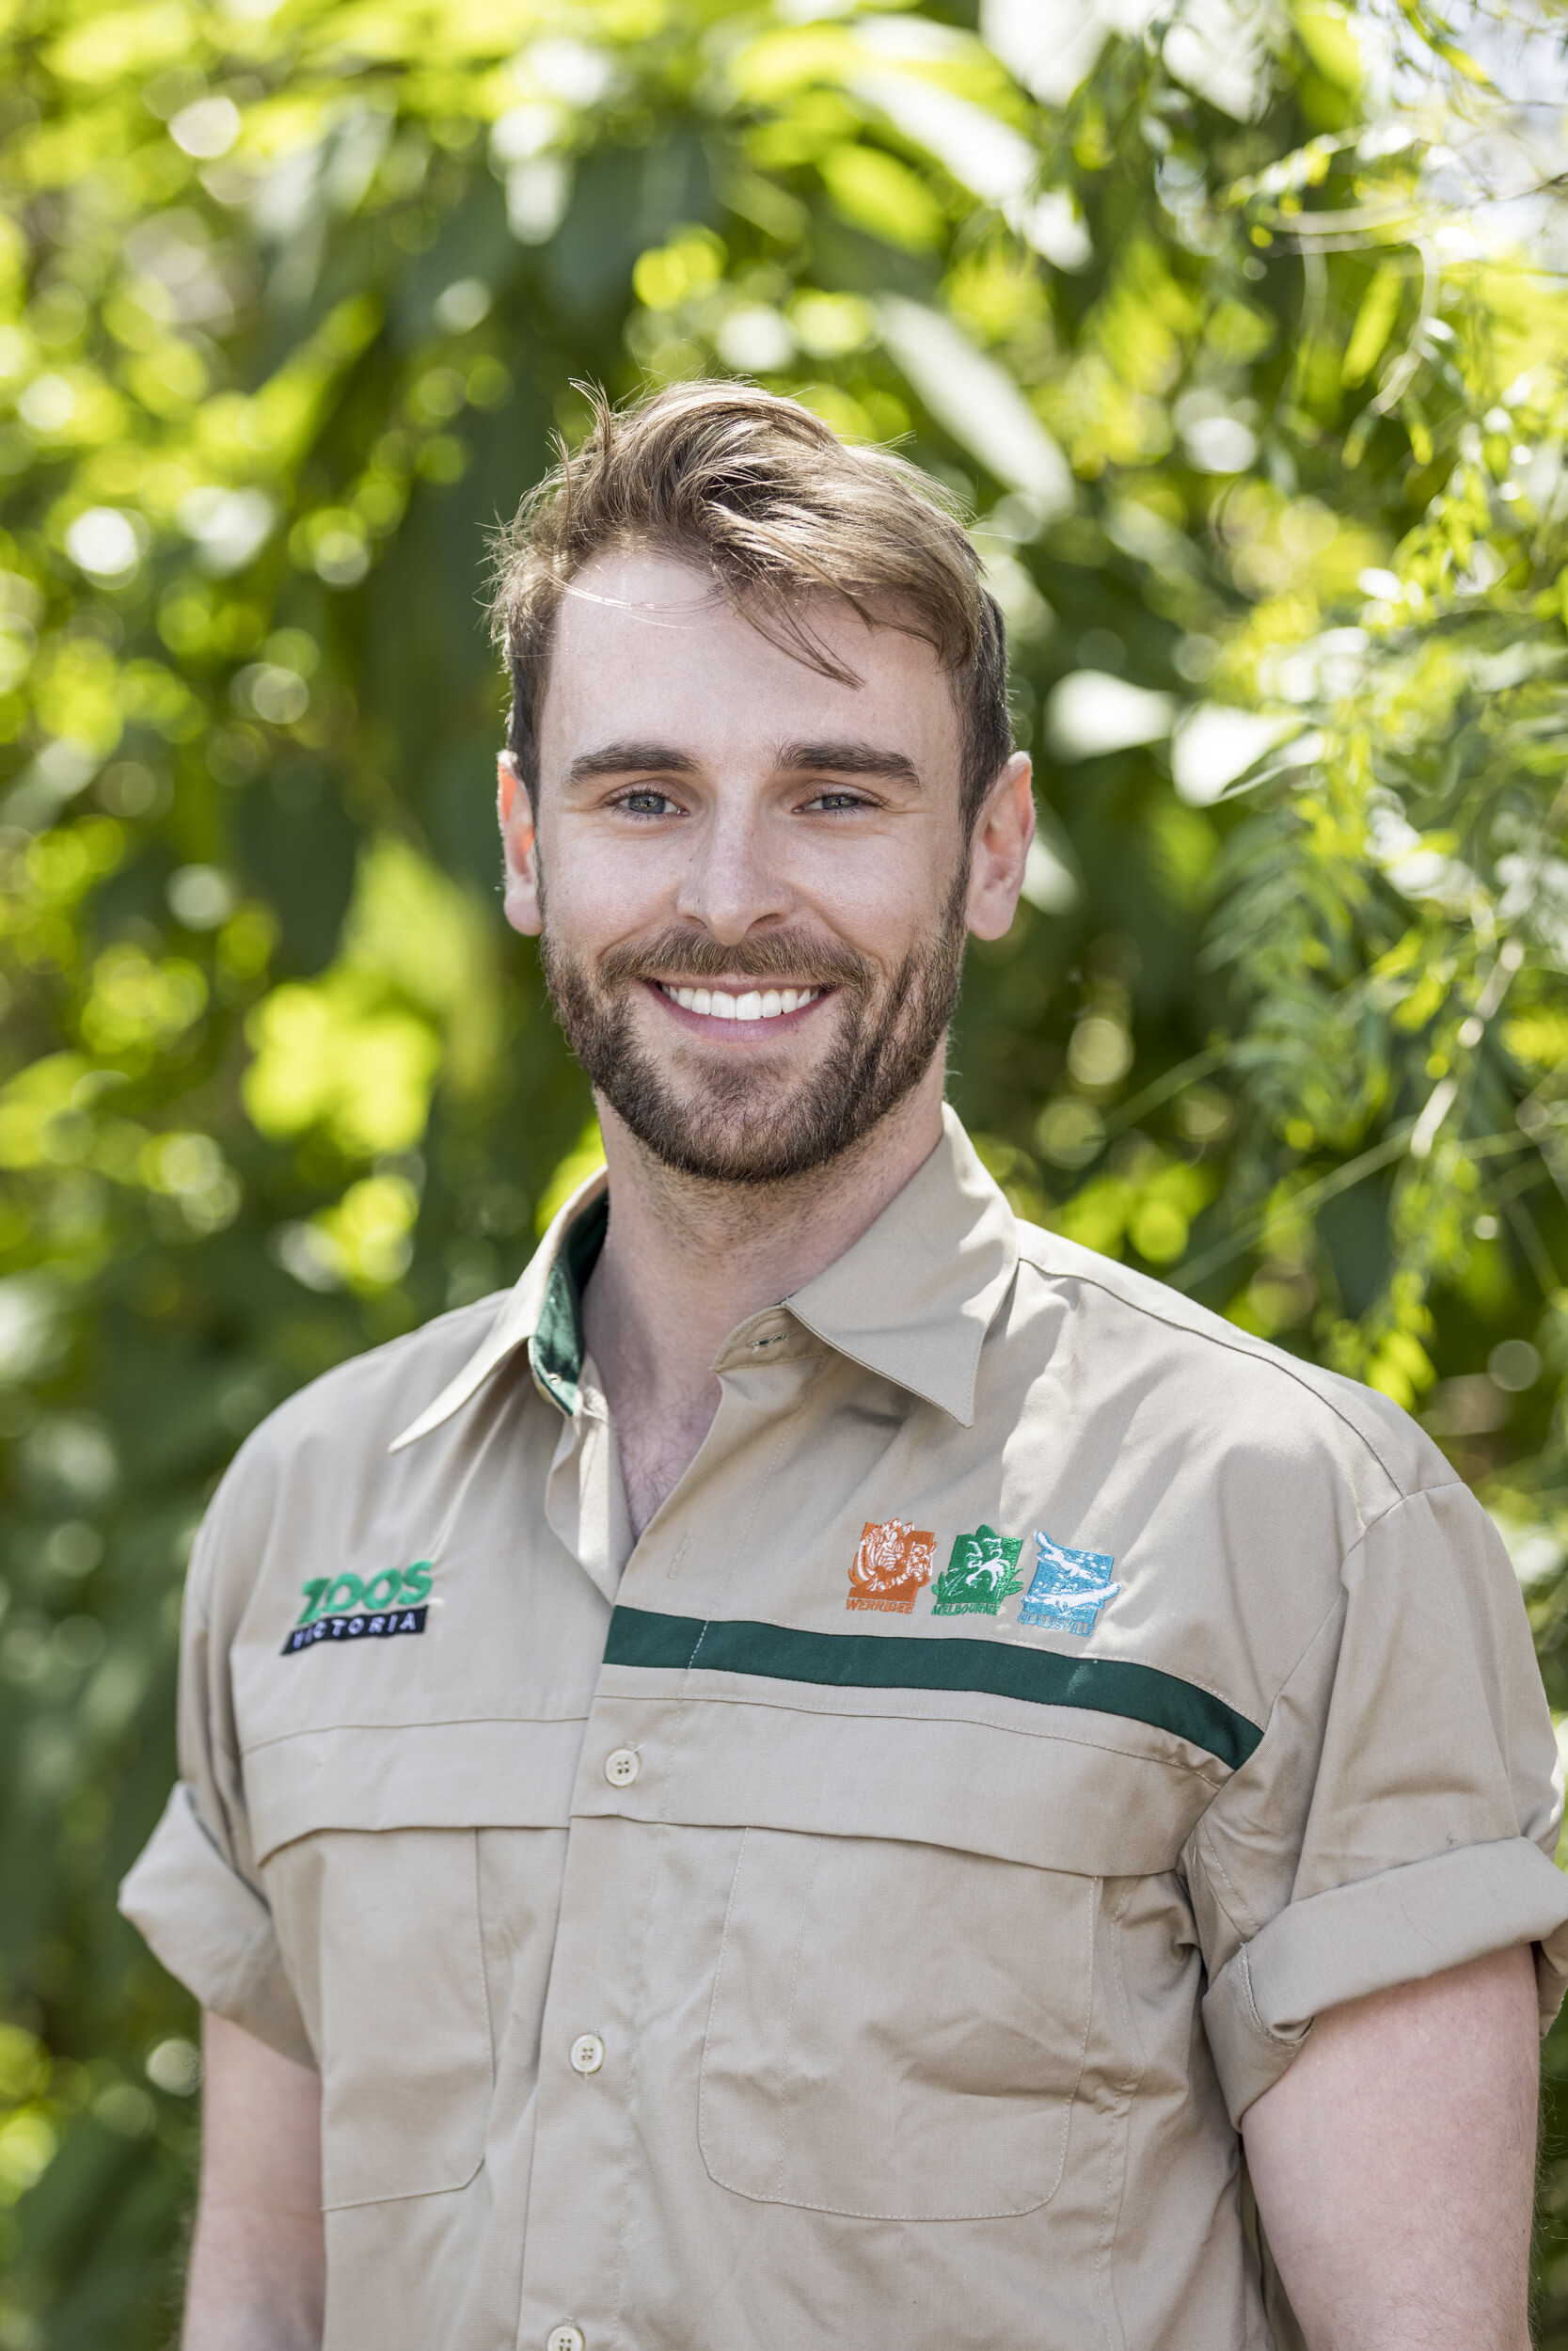 Young man in zoo keeper uniform smiling at camera